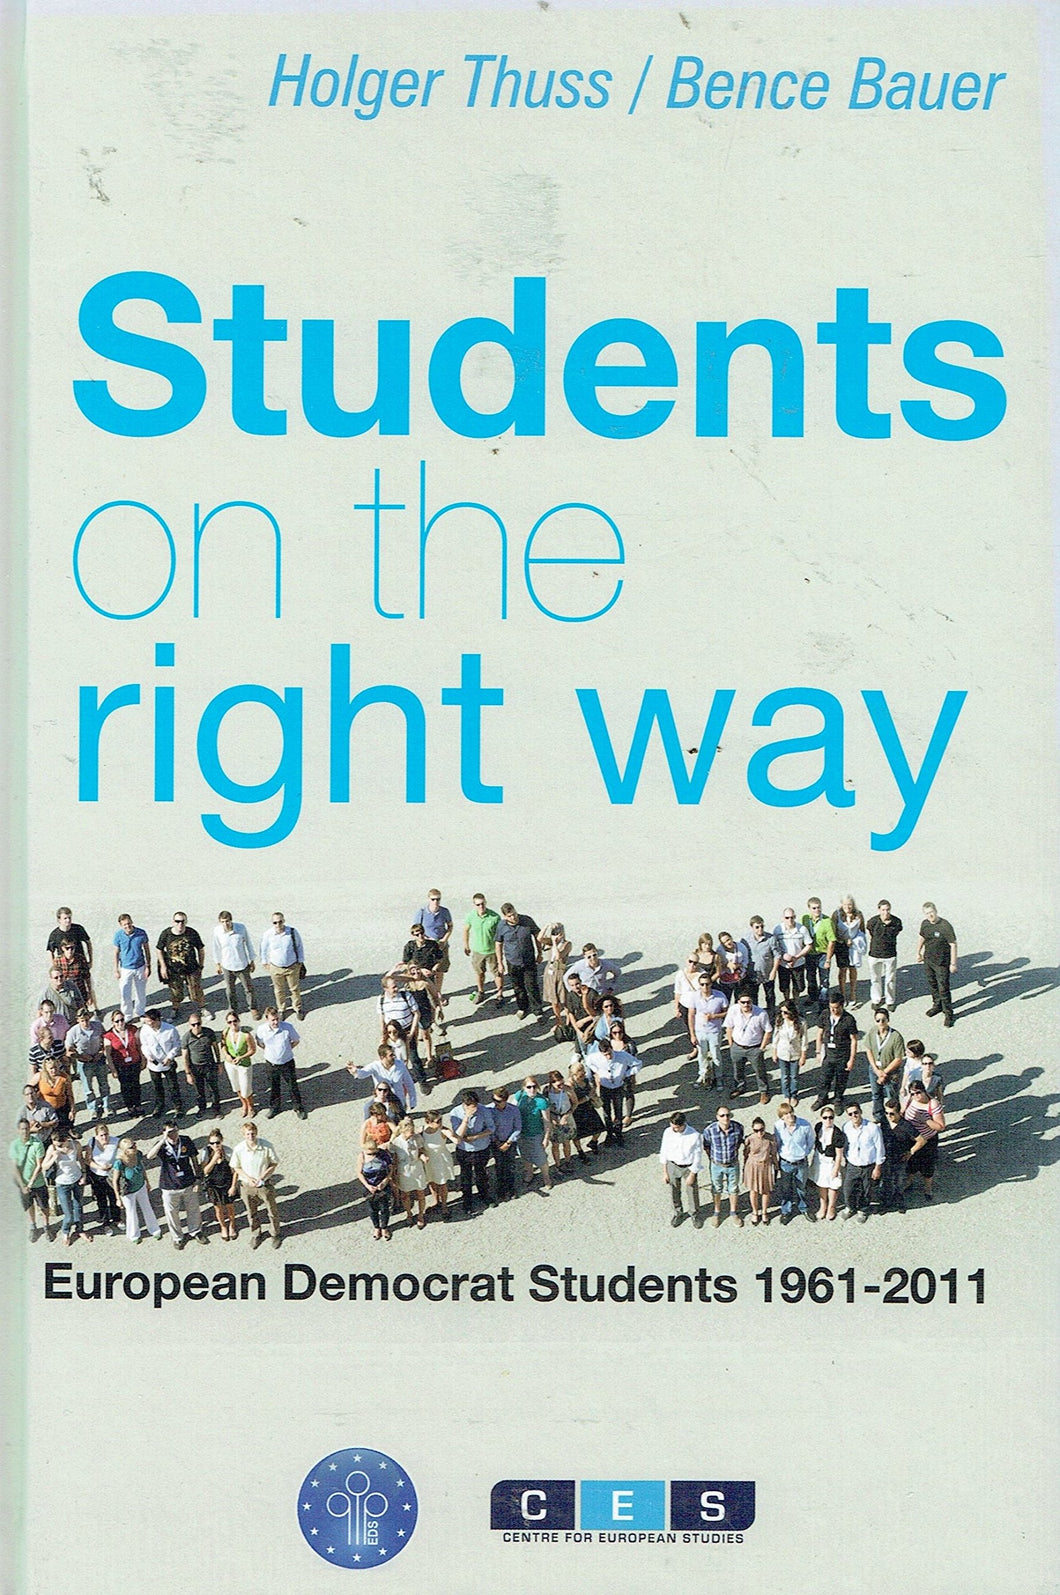 Students on the right way - European Democrat Students 1961-2011